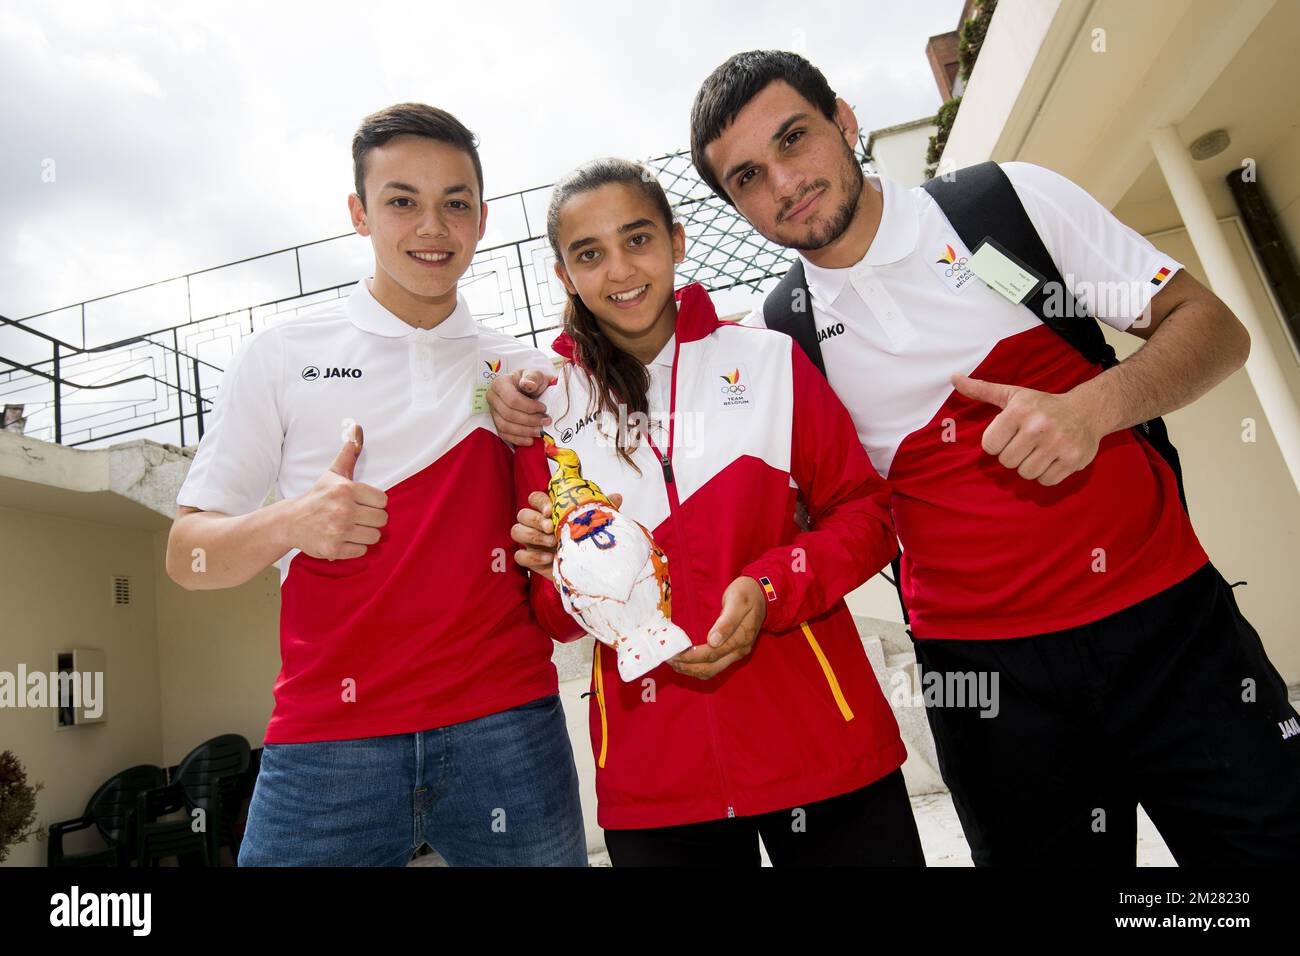 Ian Lodens, Amal Amjahid and Liga Salvatore pictured during a press conference to present the Belgian athletes who will compete at the upcoming 'World Games' event, Friday 30 June 2017, at the Polish embassy in Brussels. The 2017 edition of the World Games multi-sport event is taking place from 20 July to 30 July in Wroclaw, Poland. BELGA PHOTO JASPER JACOBS Stock Photo